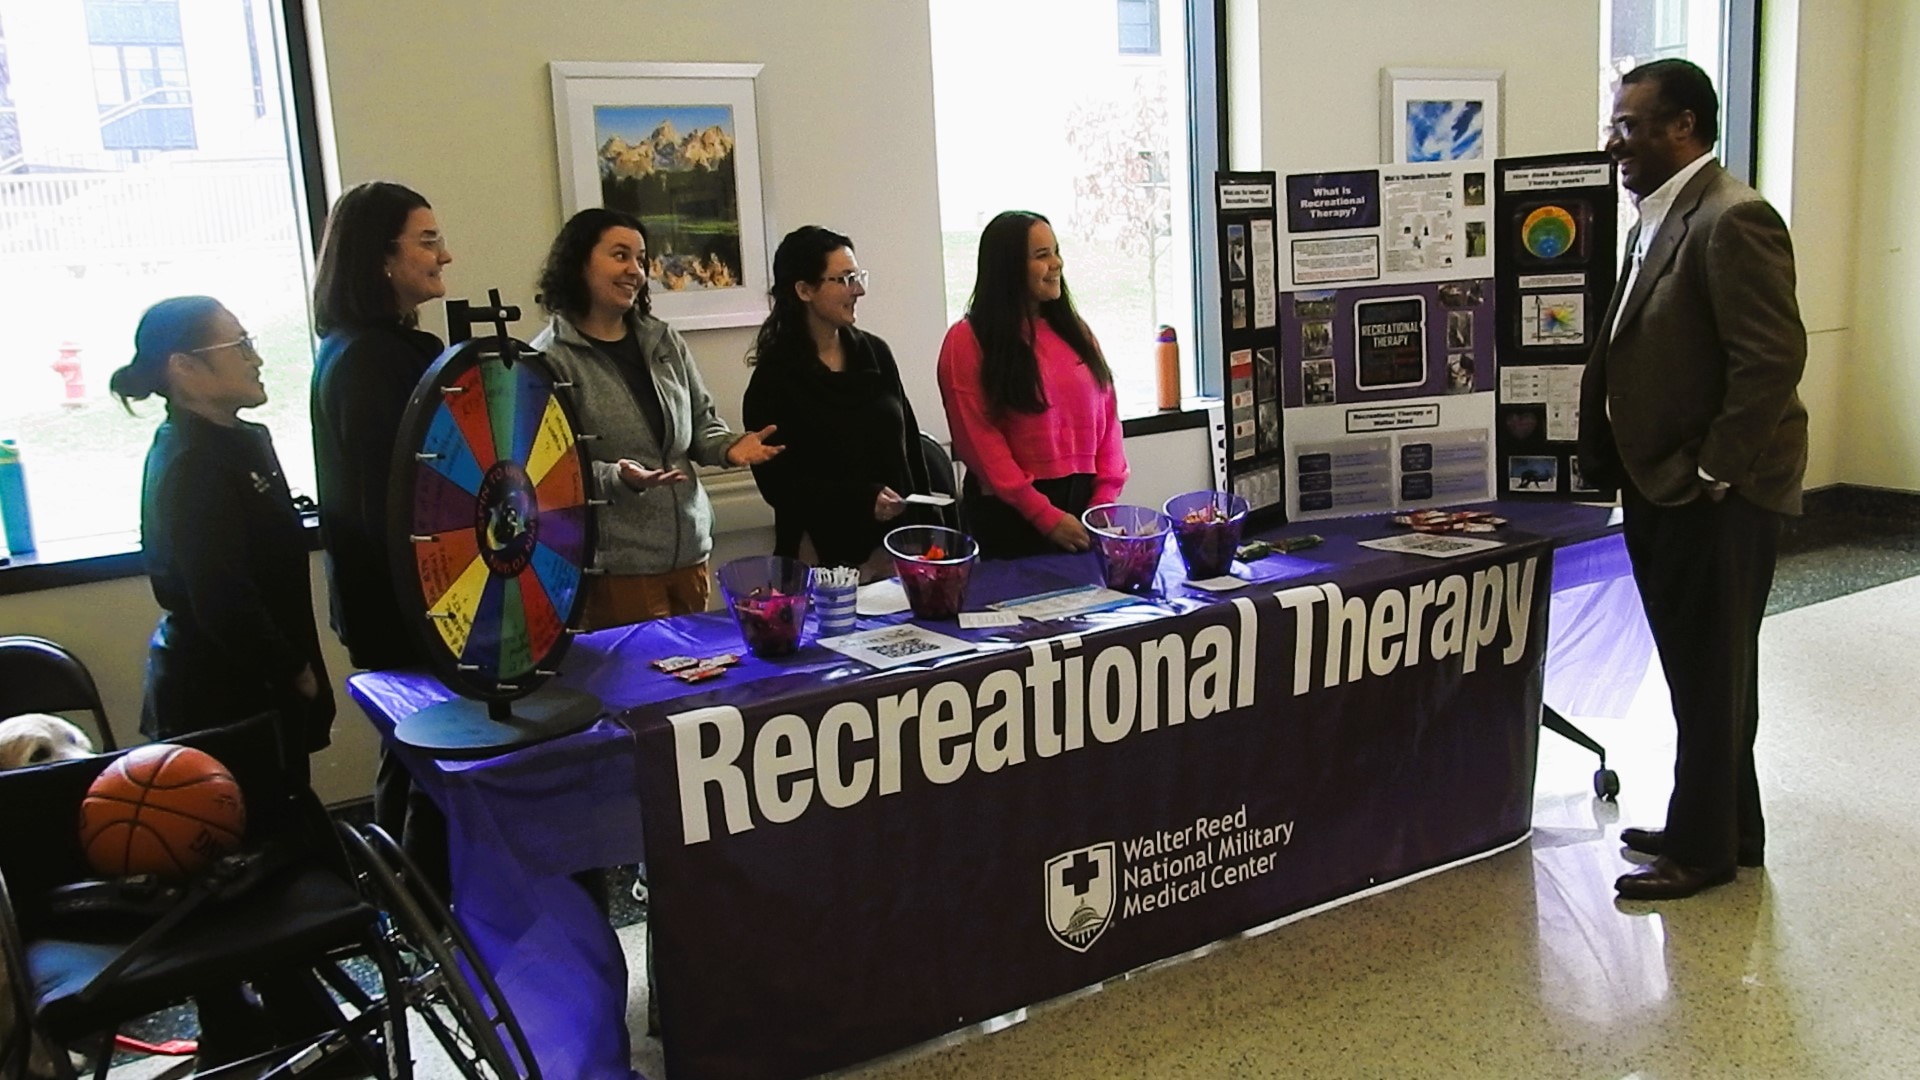 Department of Rehabilitation staff members at Walter Reed, including Recreational Therapists Cara Navarro, Stephanie Seeley, Jennifer Beattie, Jennifer Zumwalde, Meghan Campano, and Jahniya Kiliru-Liontree,  recognized National Recreational Therapy (RT) Month, observed during February, with an information table set up in the America Building at the medical center Feb. 14 for patients, staff and visitors to learn about Recreational Therapy and its benefits.